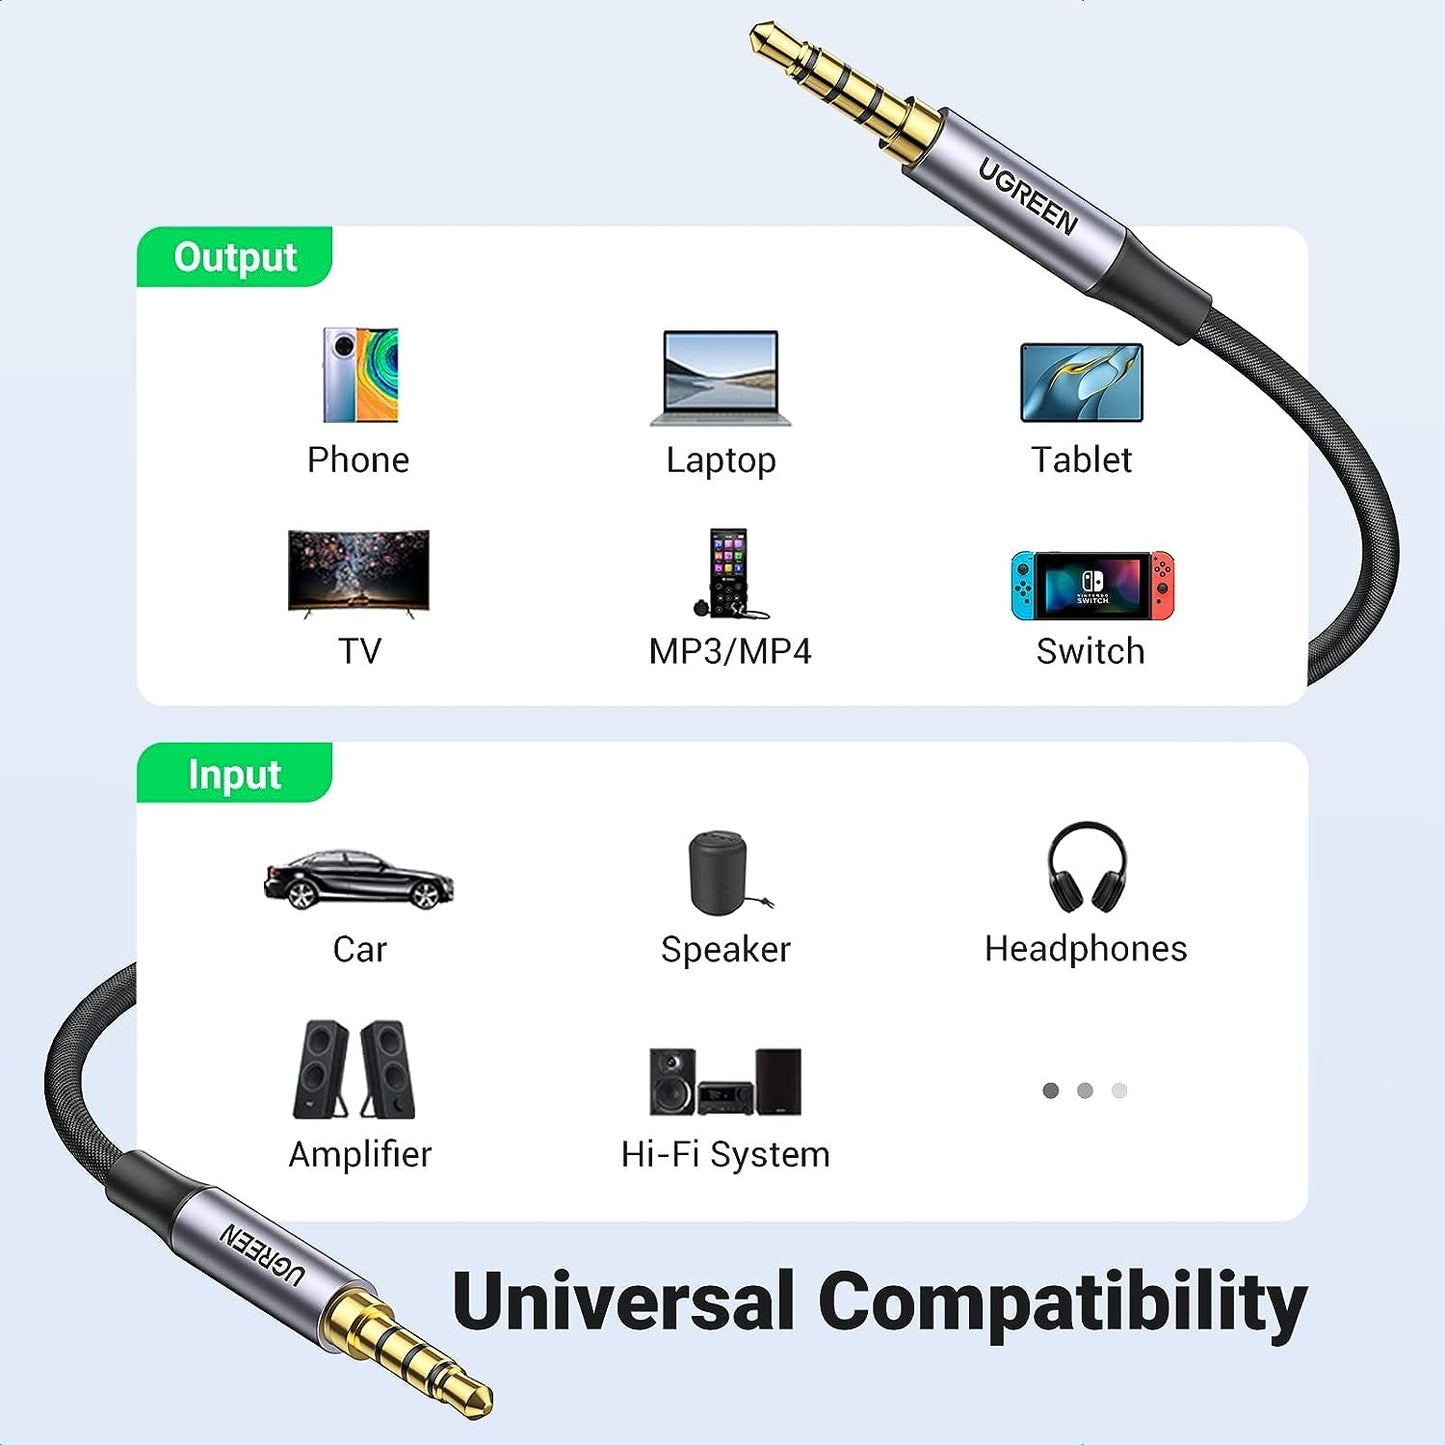 UGREEN 3.5mm 4-Pole TRRS Male to Male AUX Audio Cable Hi-Fi with Gold-Plated Jack Connectors, Nylon Braided Jacket, Multi-Layer Shielding for PC, Phone, Tablet, Speaker, Amplifier, etc. (0.5M, 1M, 1.5M, 2M, 3M, 5M)